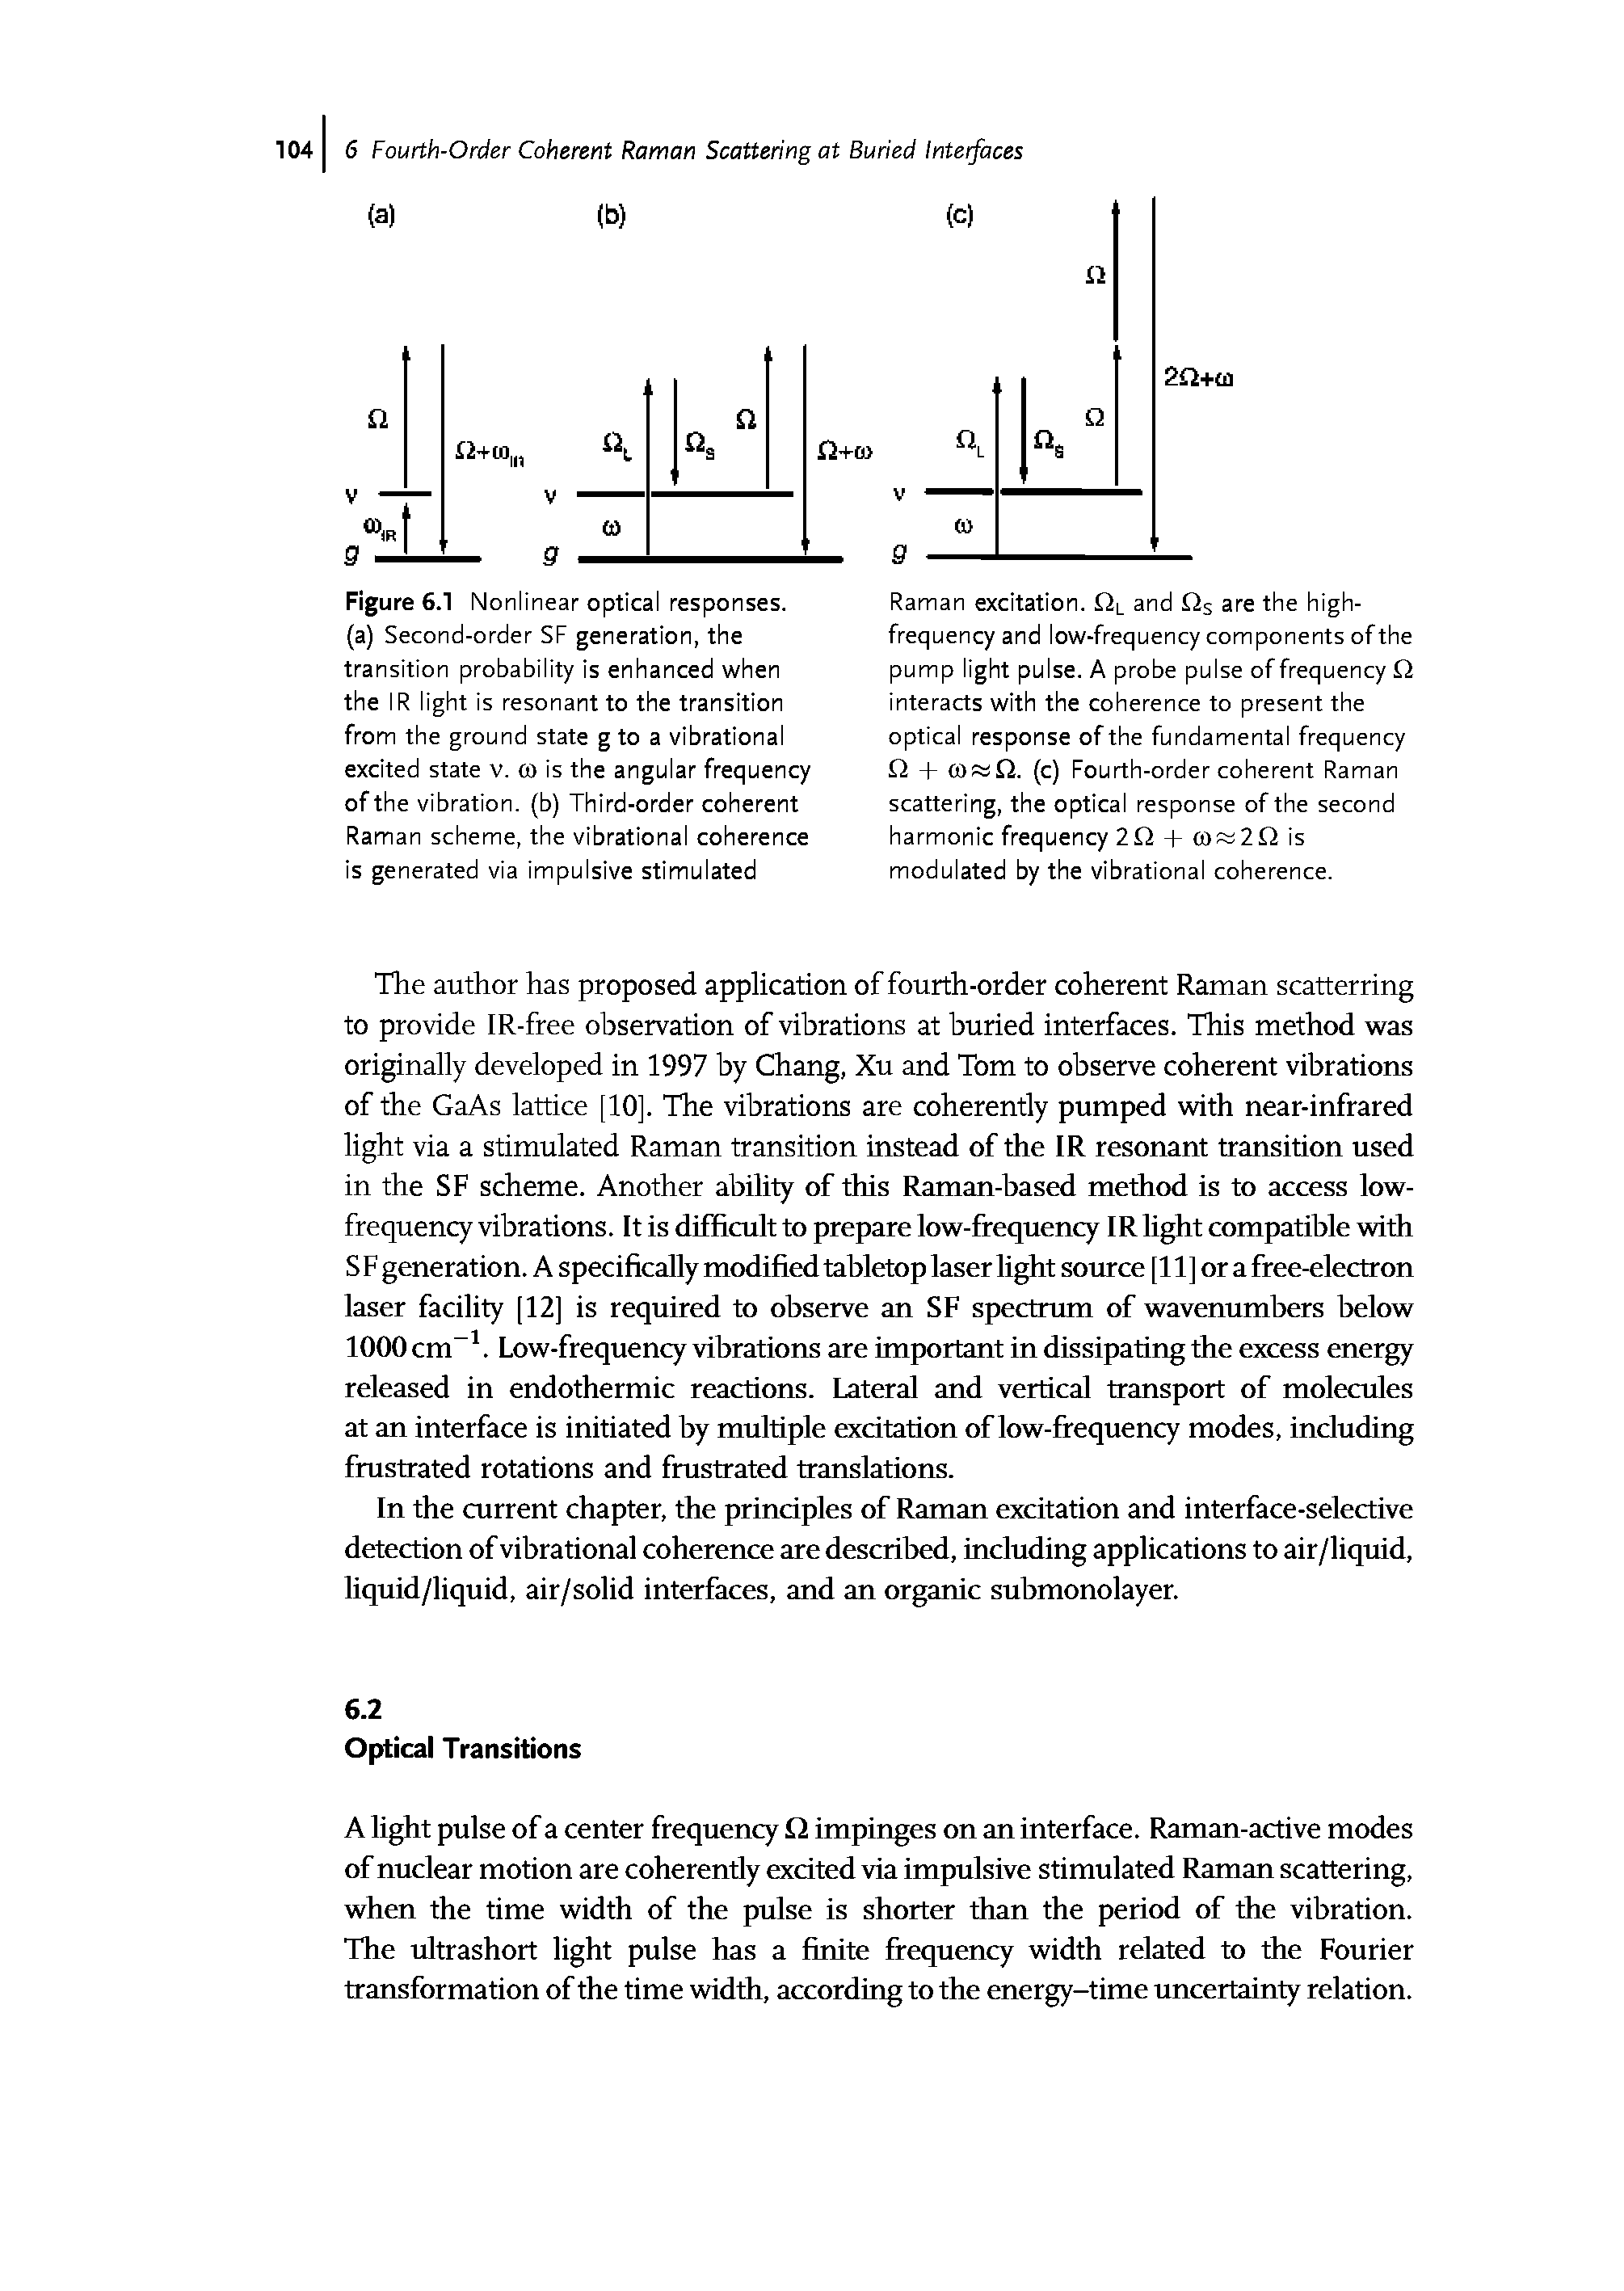 Figure 6.1 Nonlinear optical responses, (a) Second-order SF generation, the transition probability is enhanced when the IR light is resonant to the transition from the ground state g to a vibrational excited state V. CO is the angular frequency of the vibration, (b) Third-order coherent Raman scheme, the vibrational coherence is generated via impulsive stimulated...